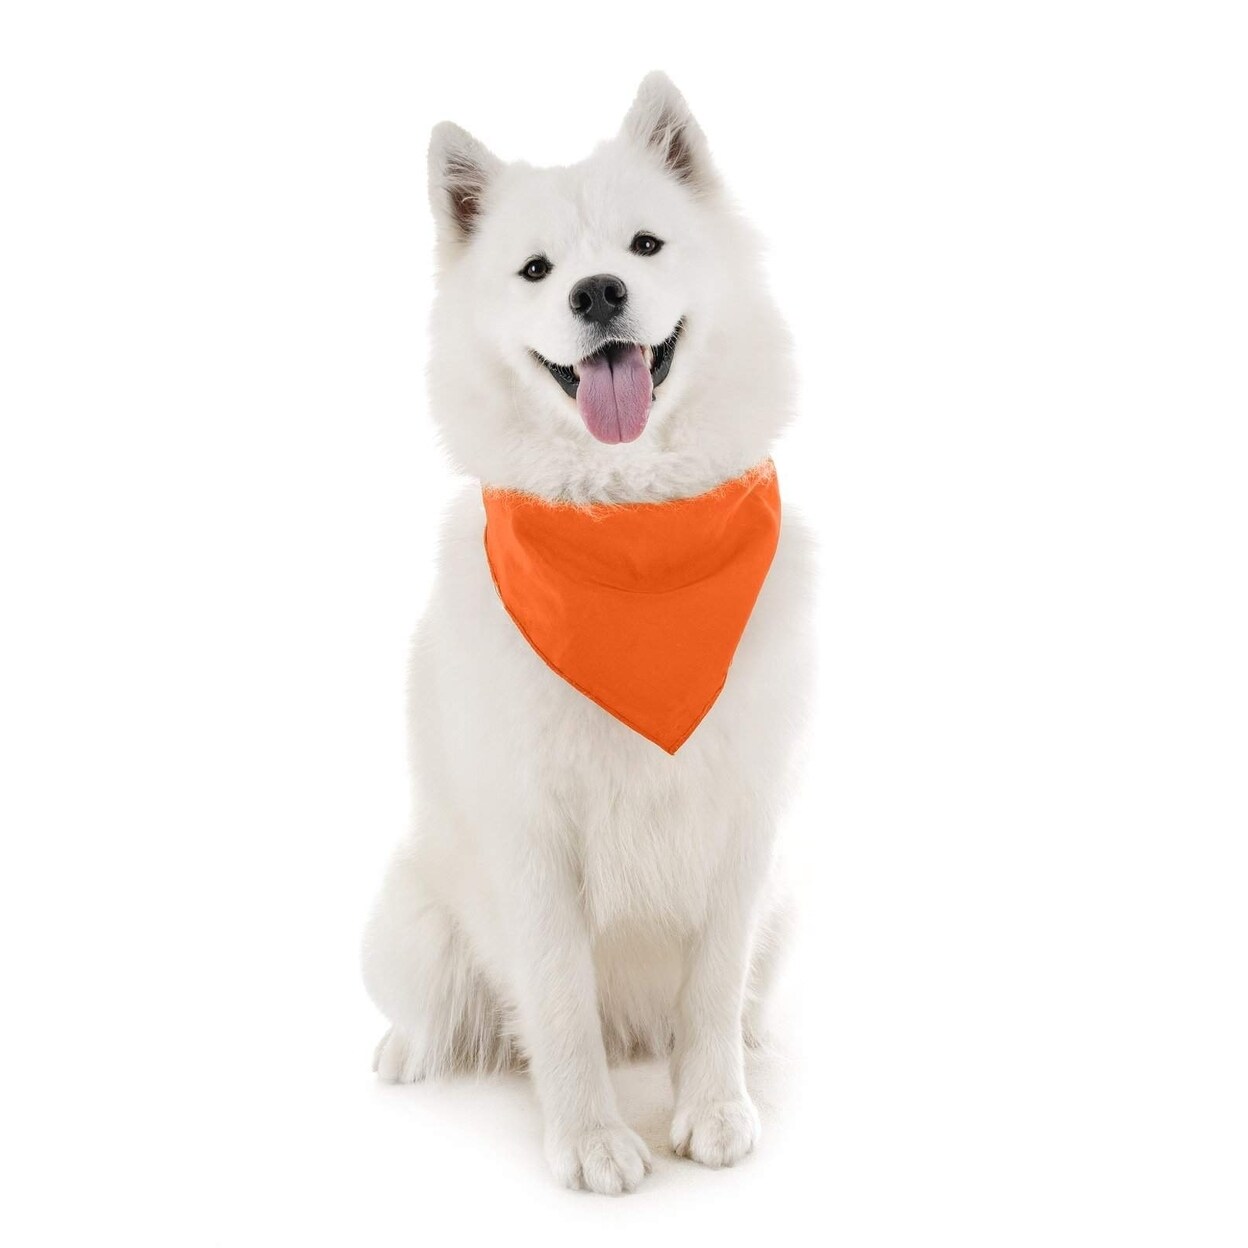 Jordefano Dog Cotton Bandanas - 4 Pack - Scarf Triangle Bibs for Small Medium and Large Puppies Dogs and Cats